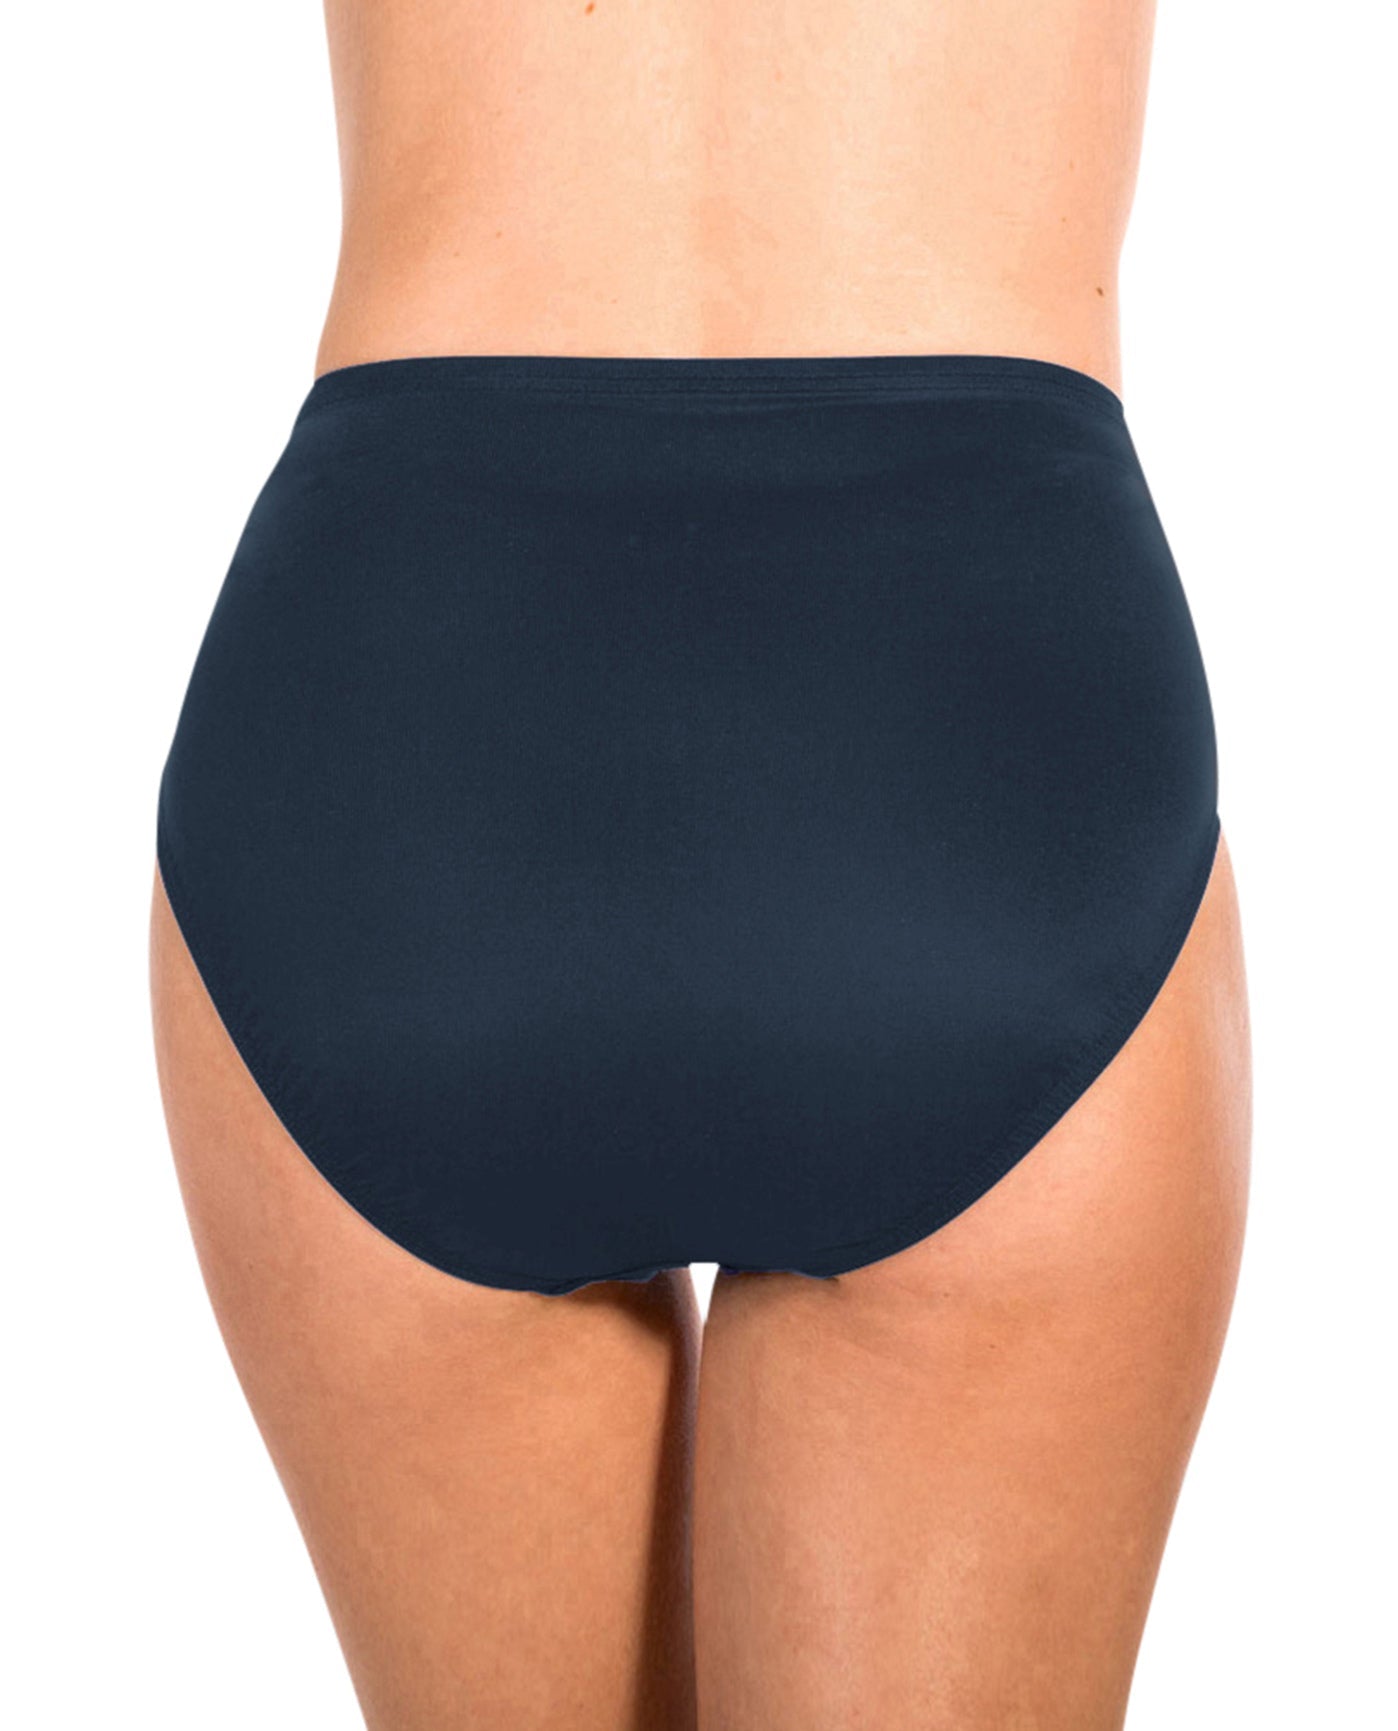 Back View Of Miraclesuit Solid Black Classic Brief Swim Bottom | MIR Blue